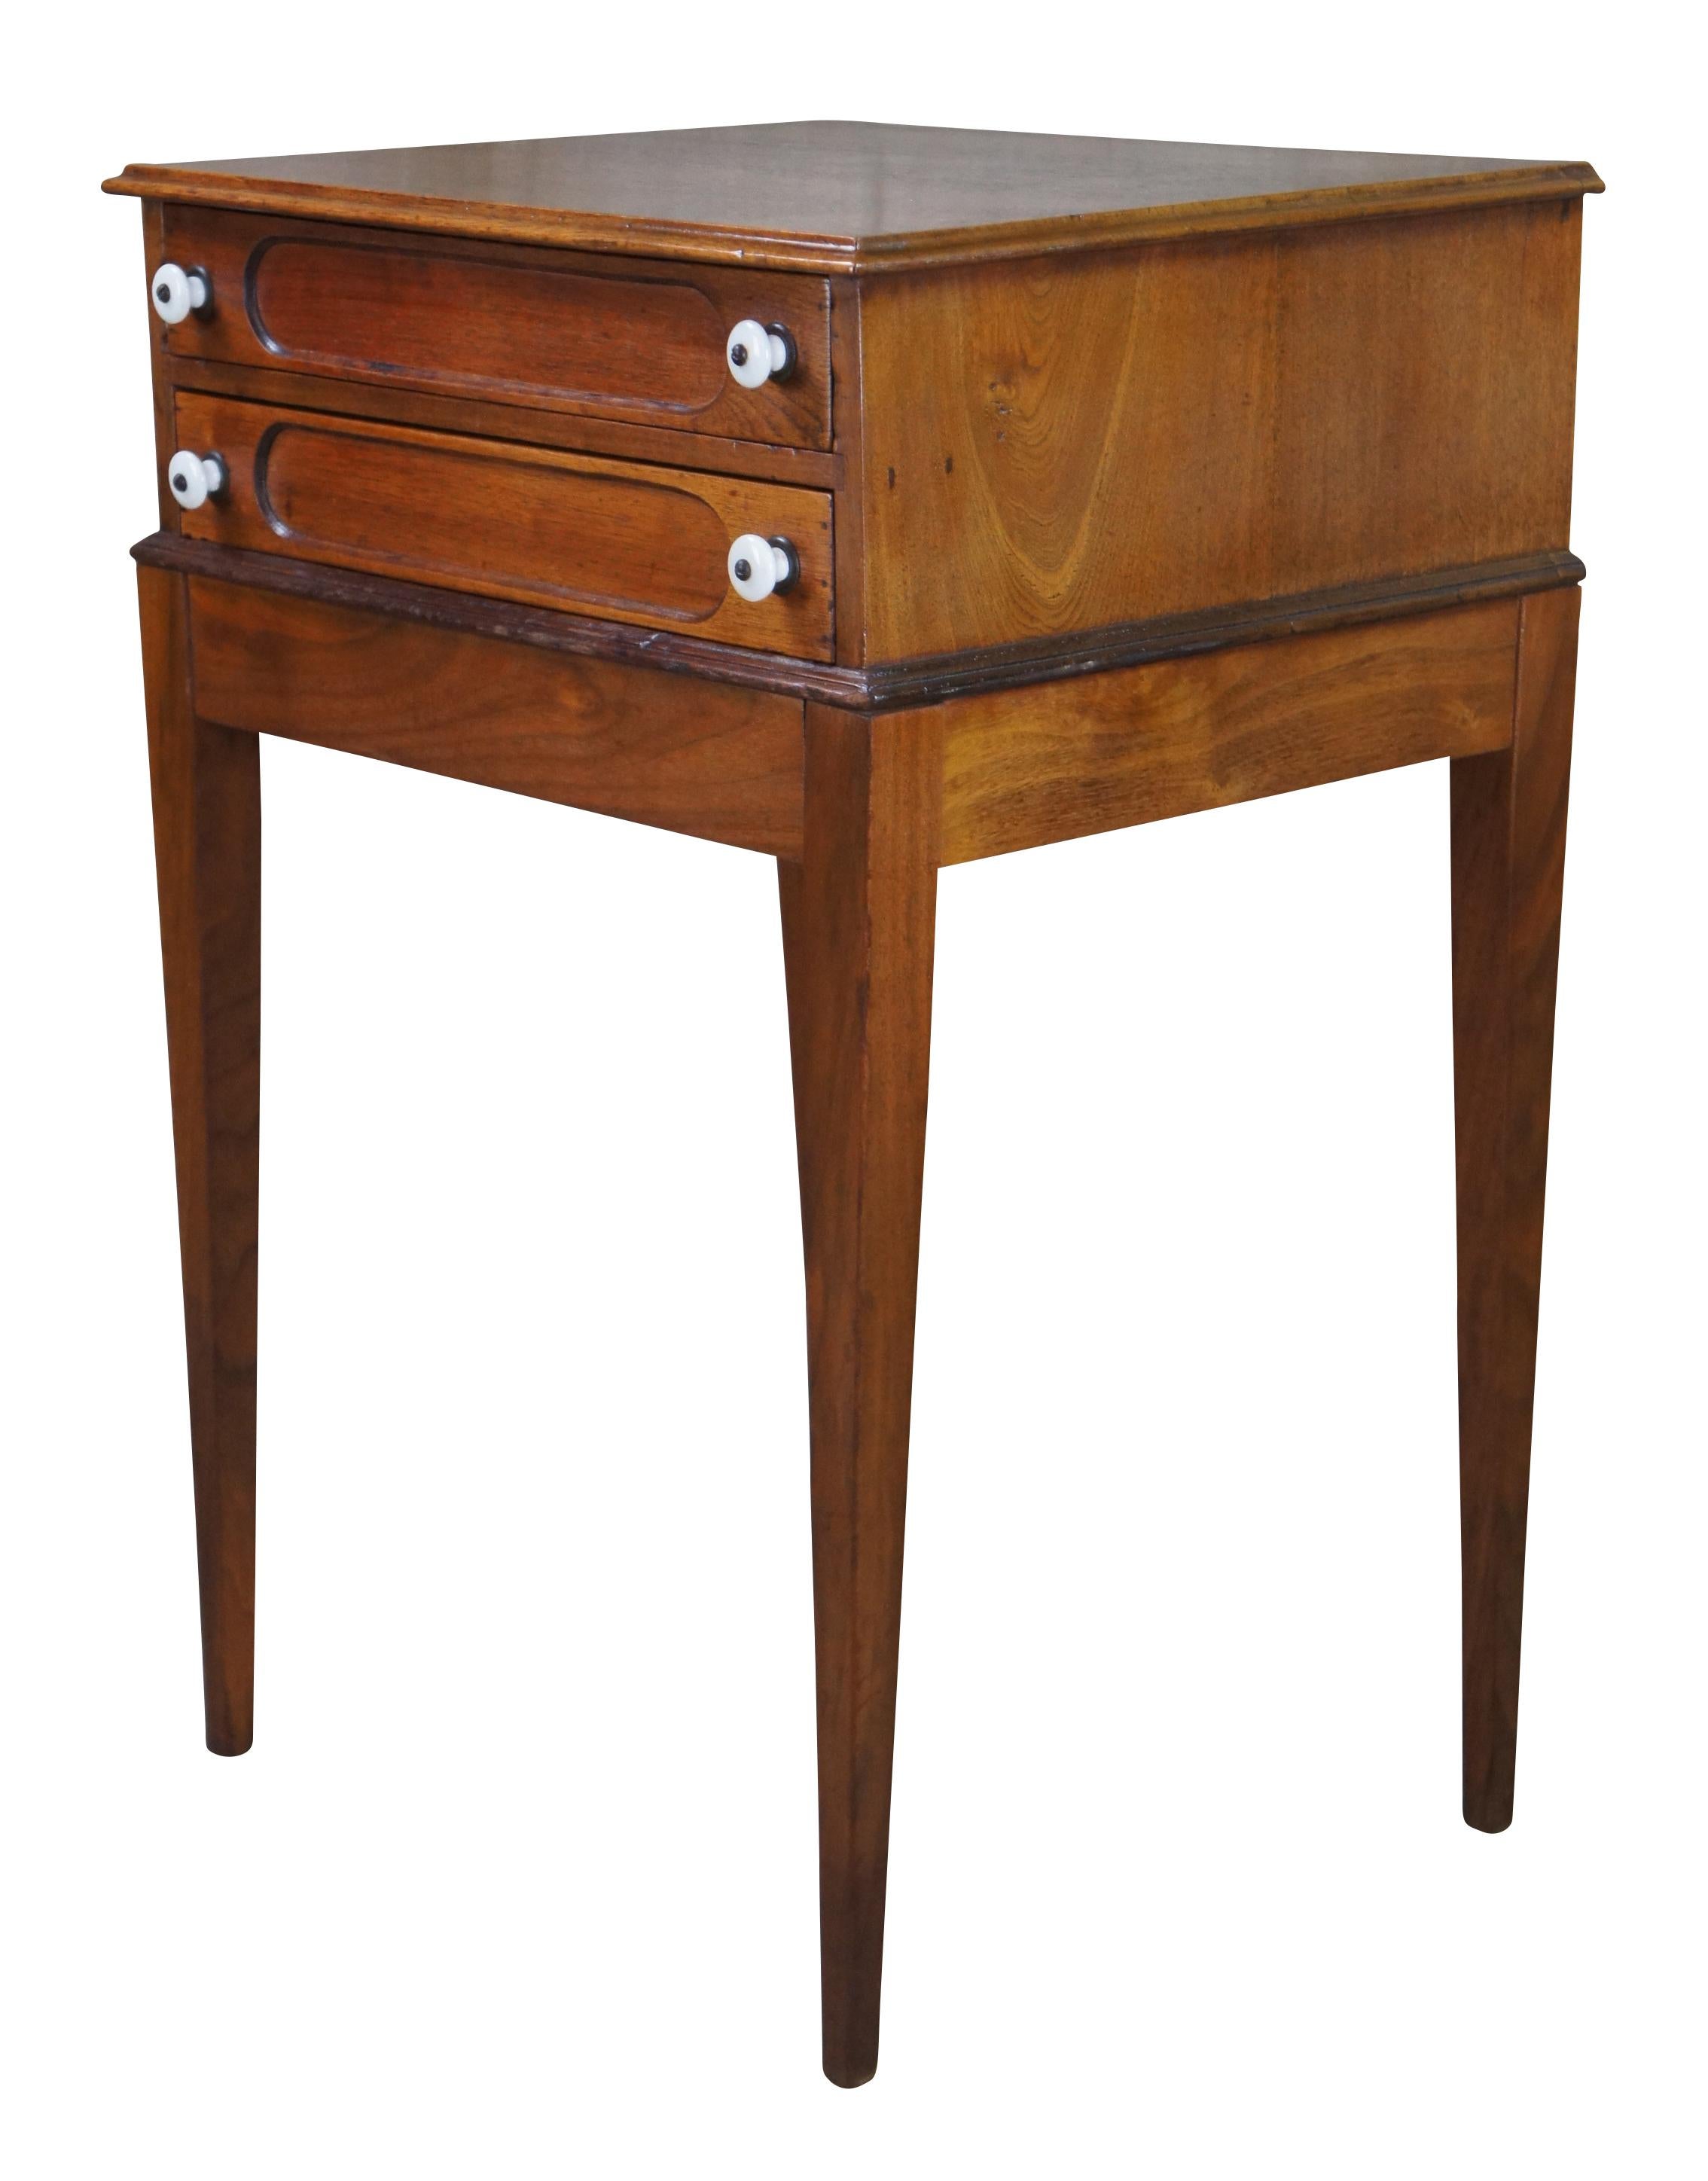 Antique early American spool cabinet side table. Made of walnut featuring two drawers with classic inset paneled fronts and porcelain knobs supported by square tapered legs. Measures: 28